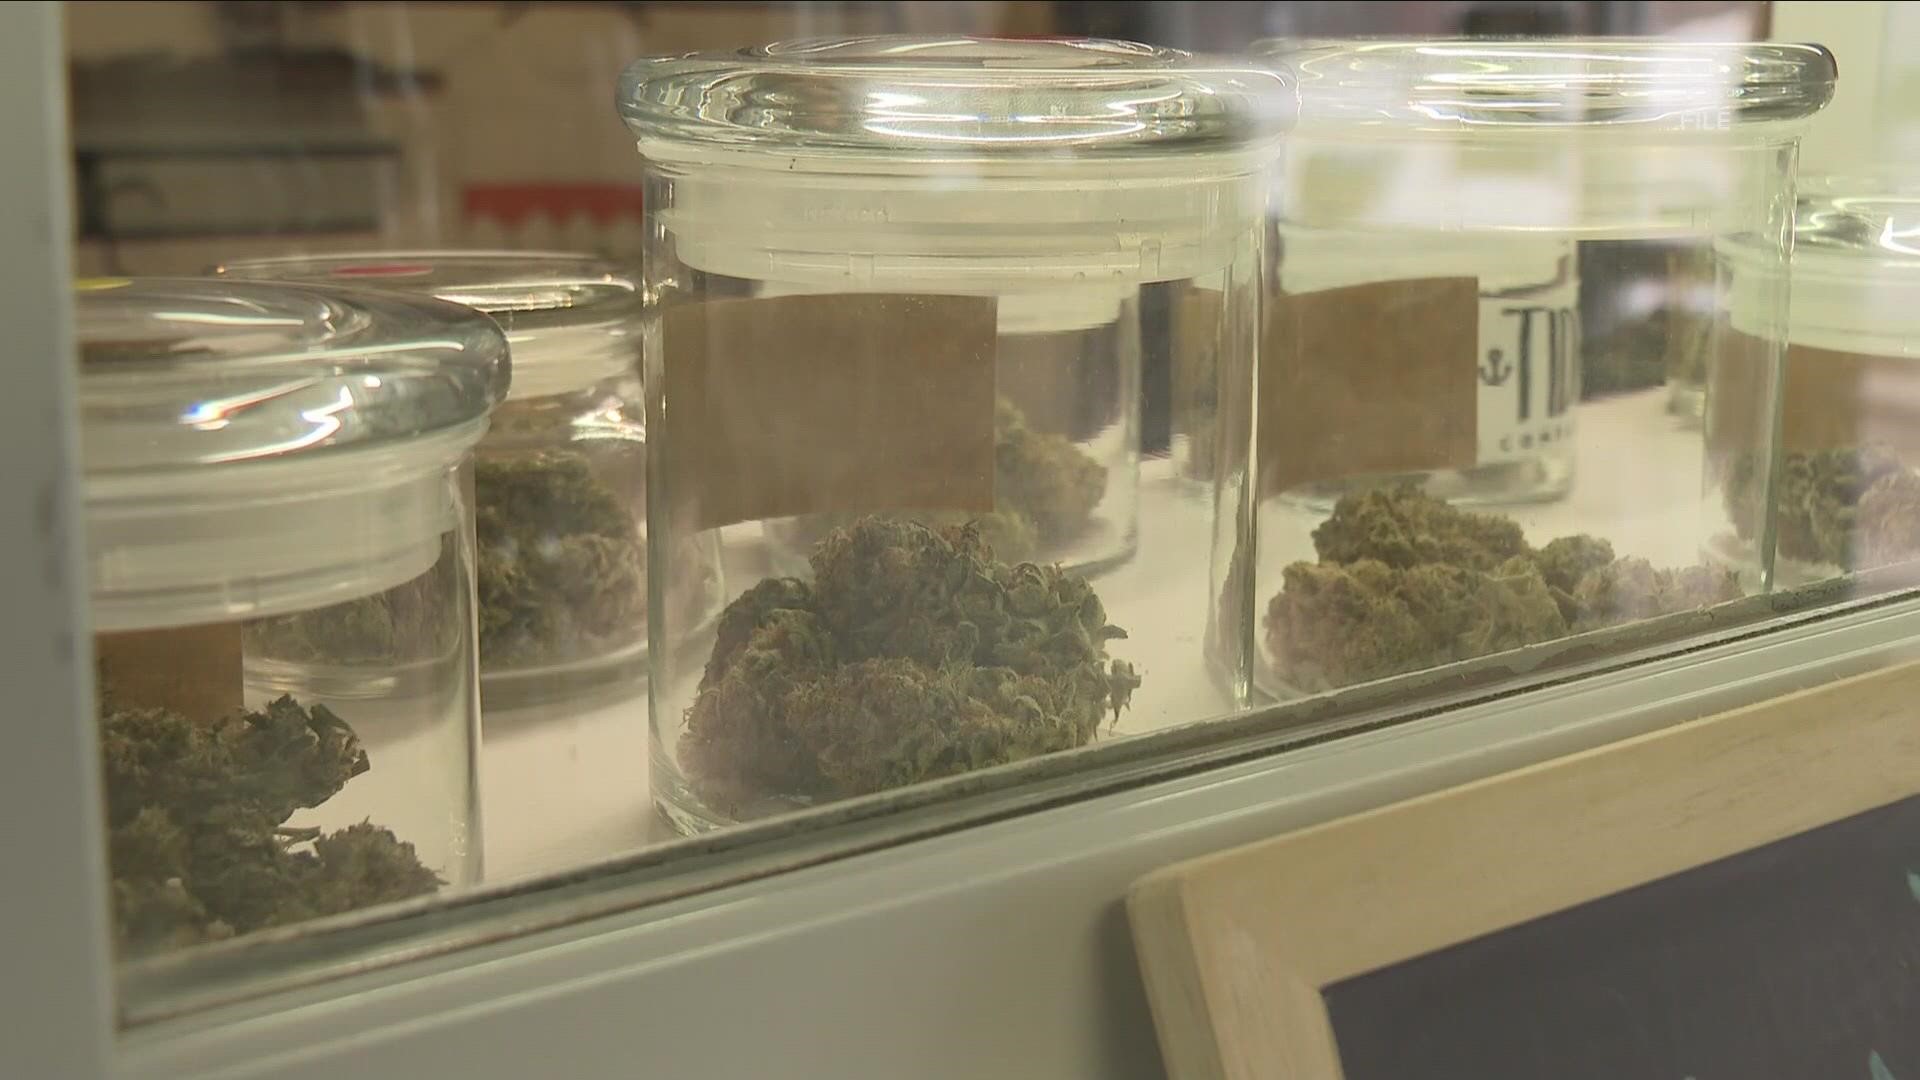 The state office of cannabis management sees demand to get marijuana sales up and running in licensed dispensaries 11 out of that initial 150 approval slated for WNY